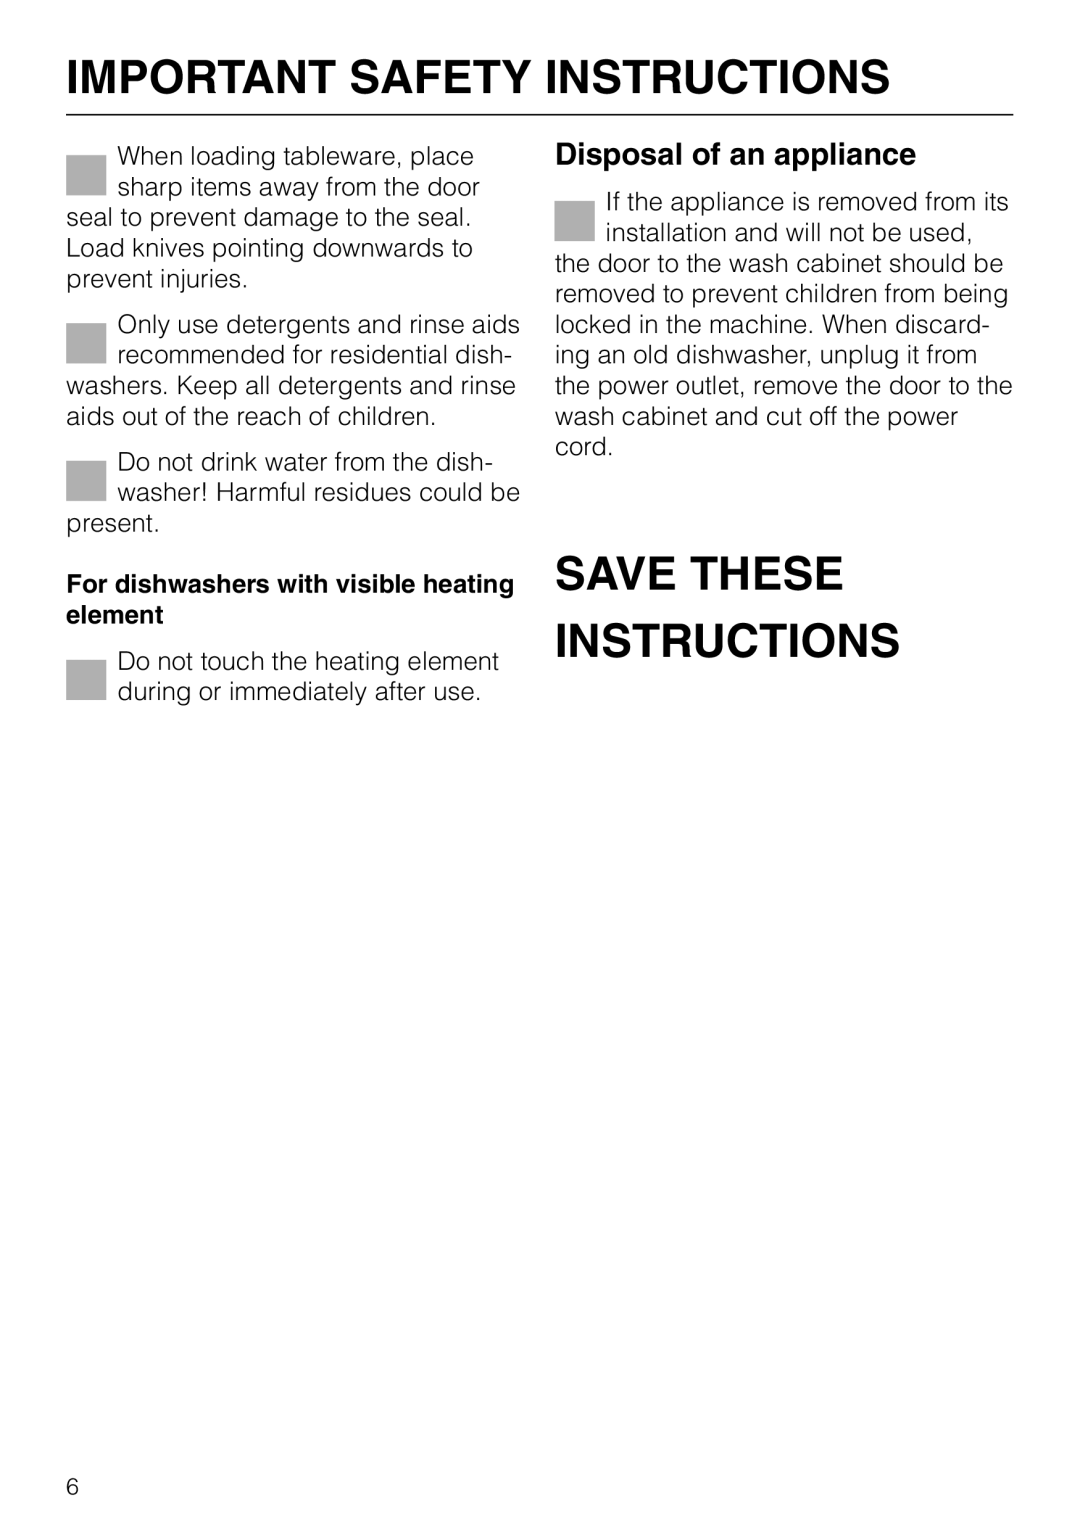 Miele G843VI, G843SCVI, G643SCVI manual Save These Instructions, Disposal of an appliance, Important Safety Instructions 